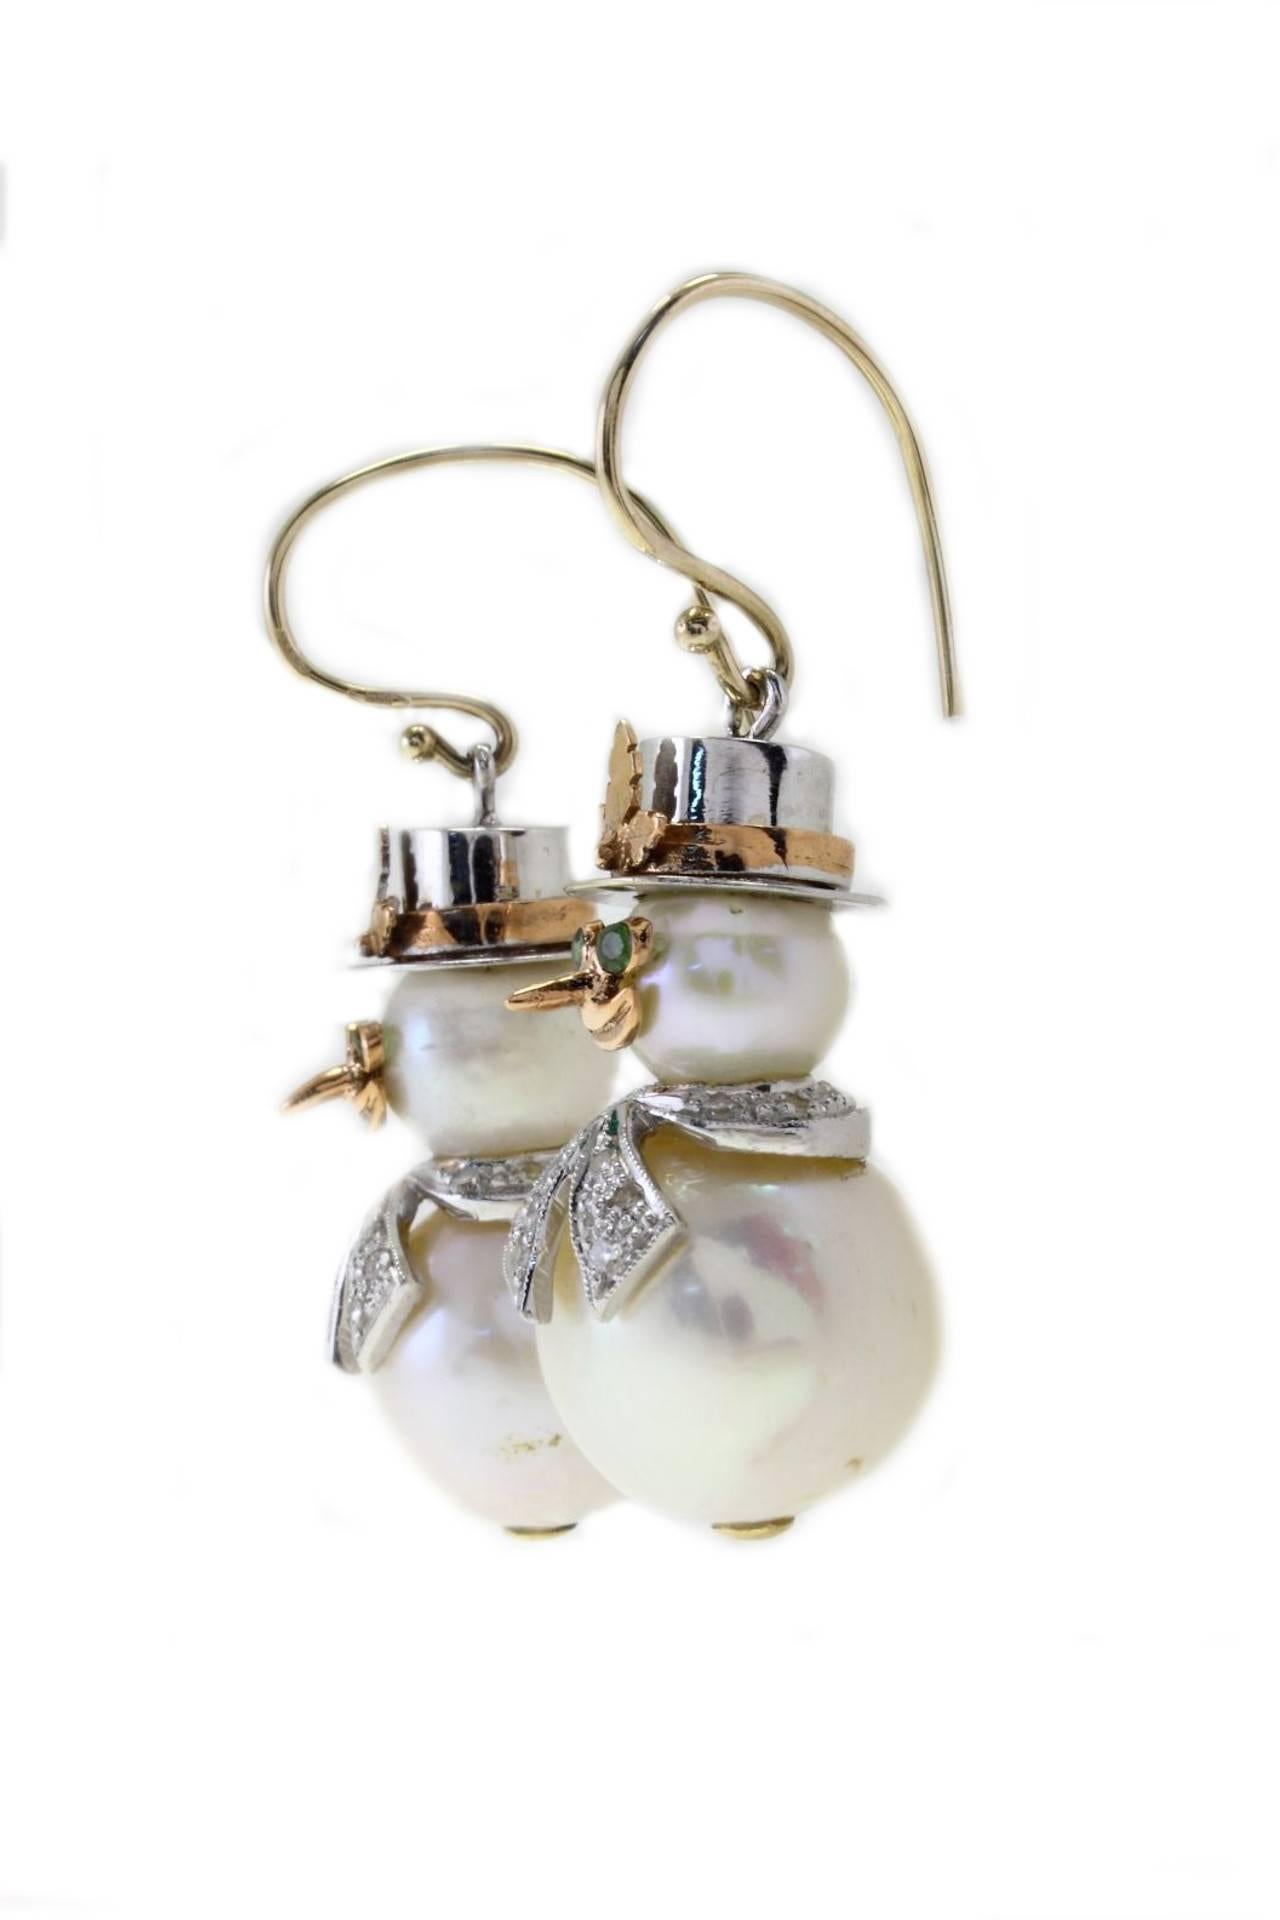 Snowman earrings in 14Kt gold composed of 2 big pearls, tsavorite as eyes and a diamond scarf.

diamonded (0.41 Kt). 
tsavorite (0.10Kt)
pearls(10.60gr)  diameter:  body about 16 mm and head 8.5 mm  
Tot weight 17.3 gr
R.f. 518023
